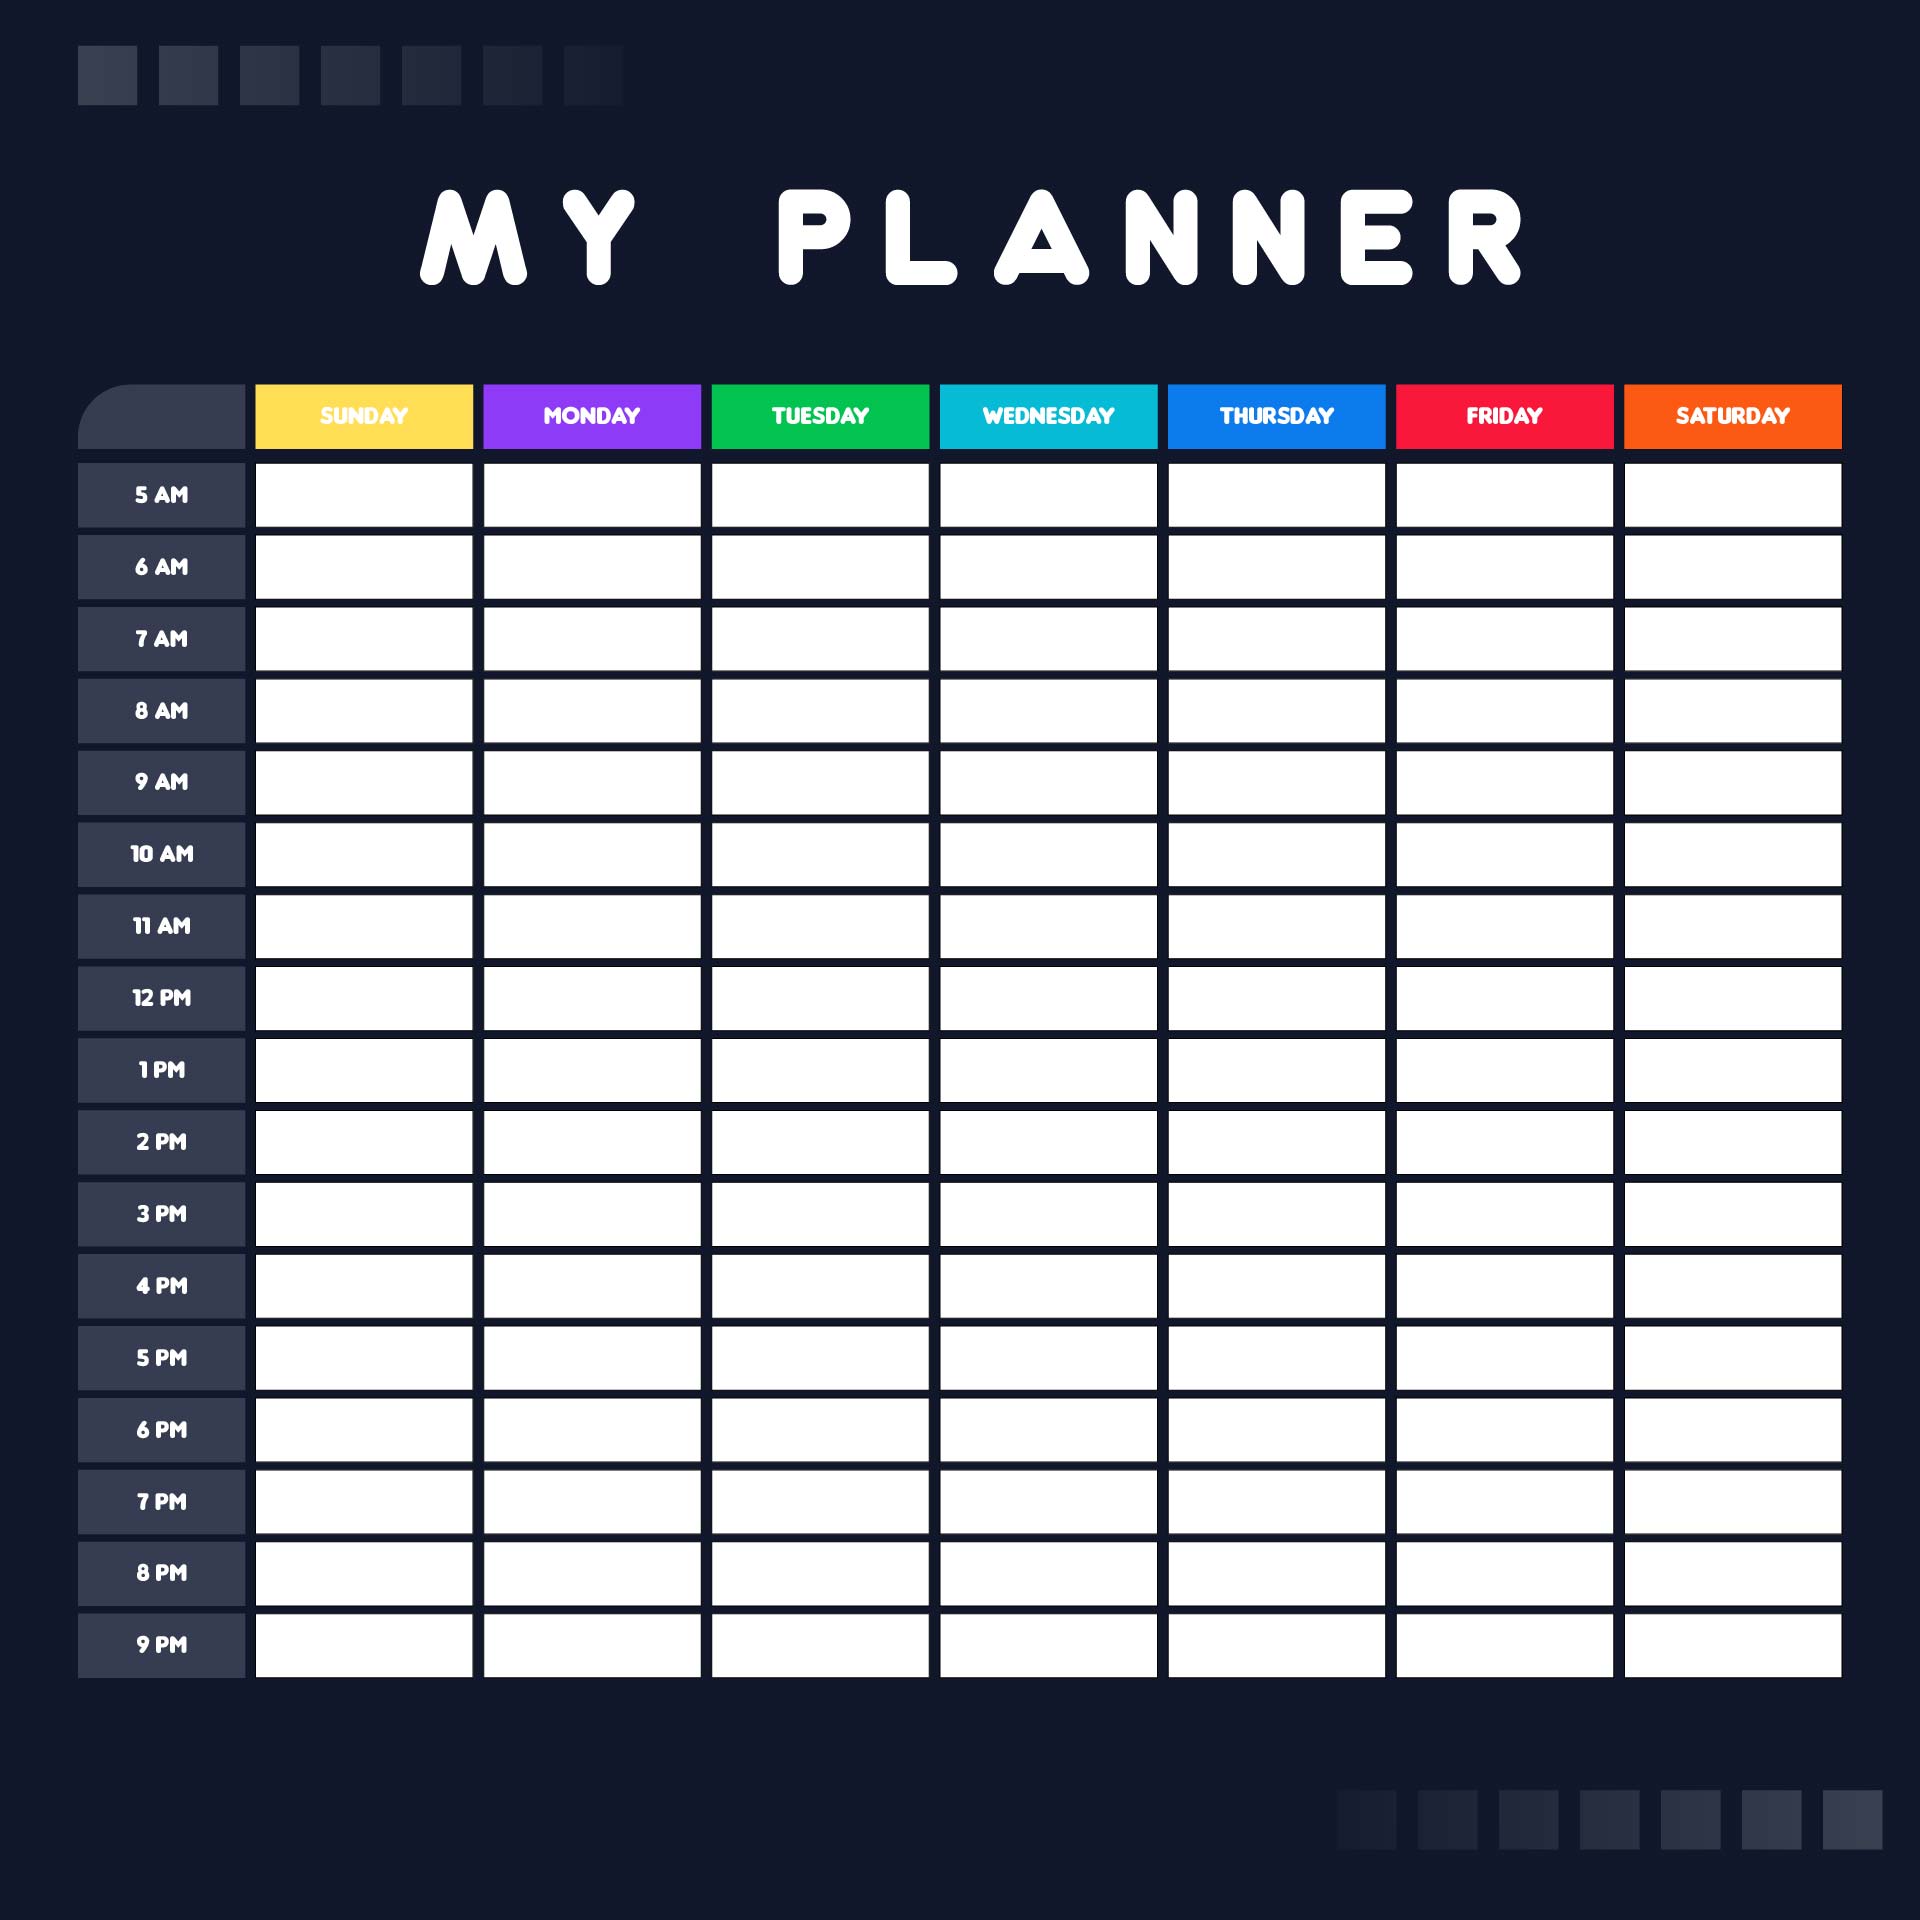 Weekly Planner with Time Block Grid